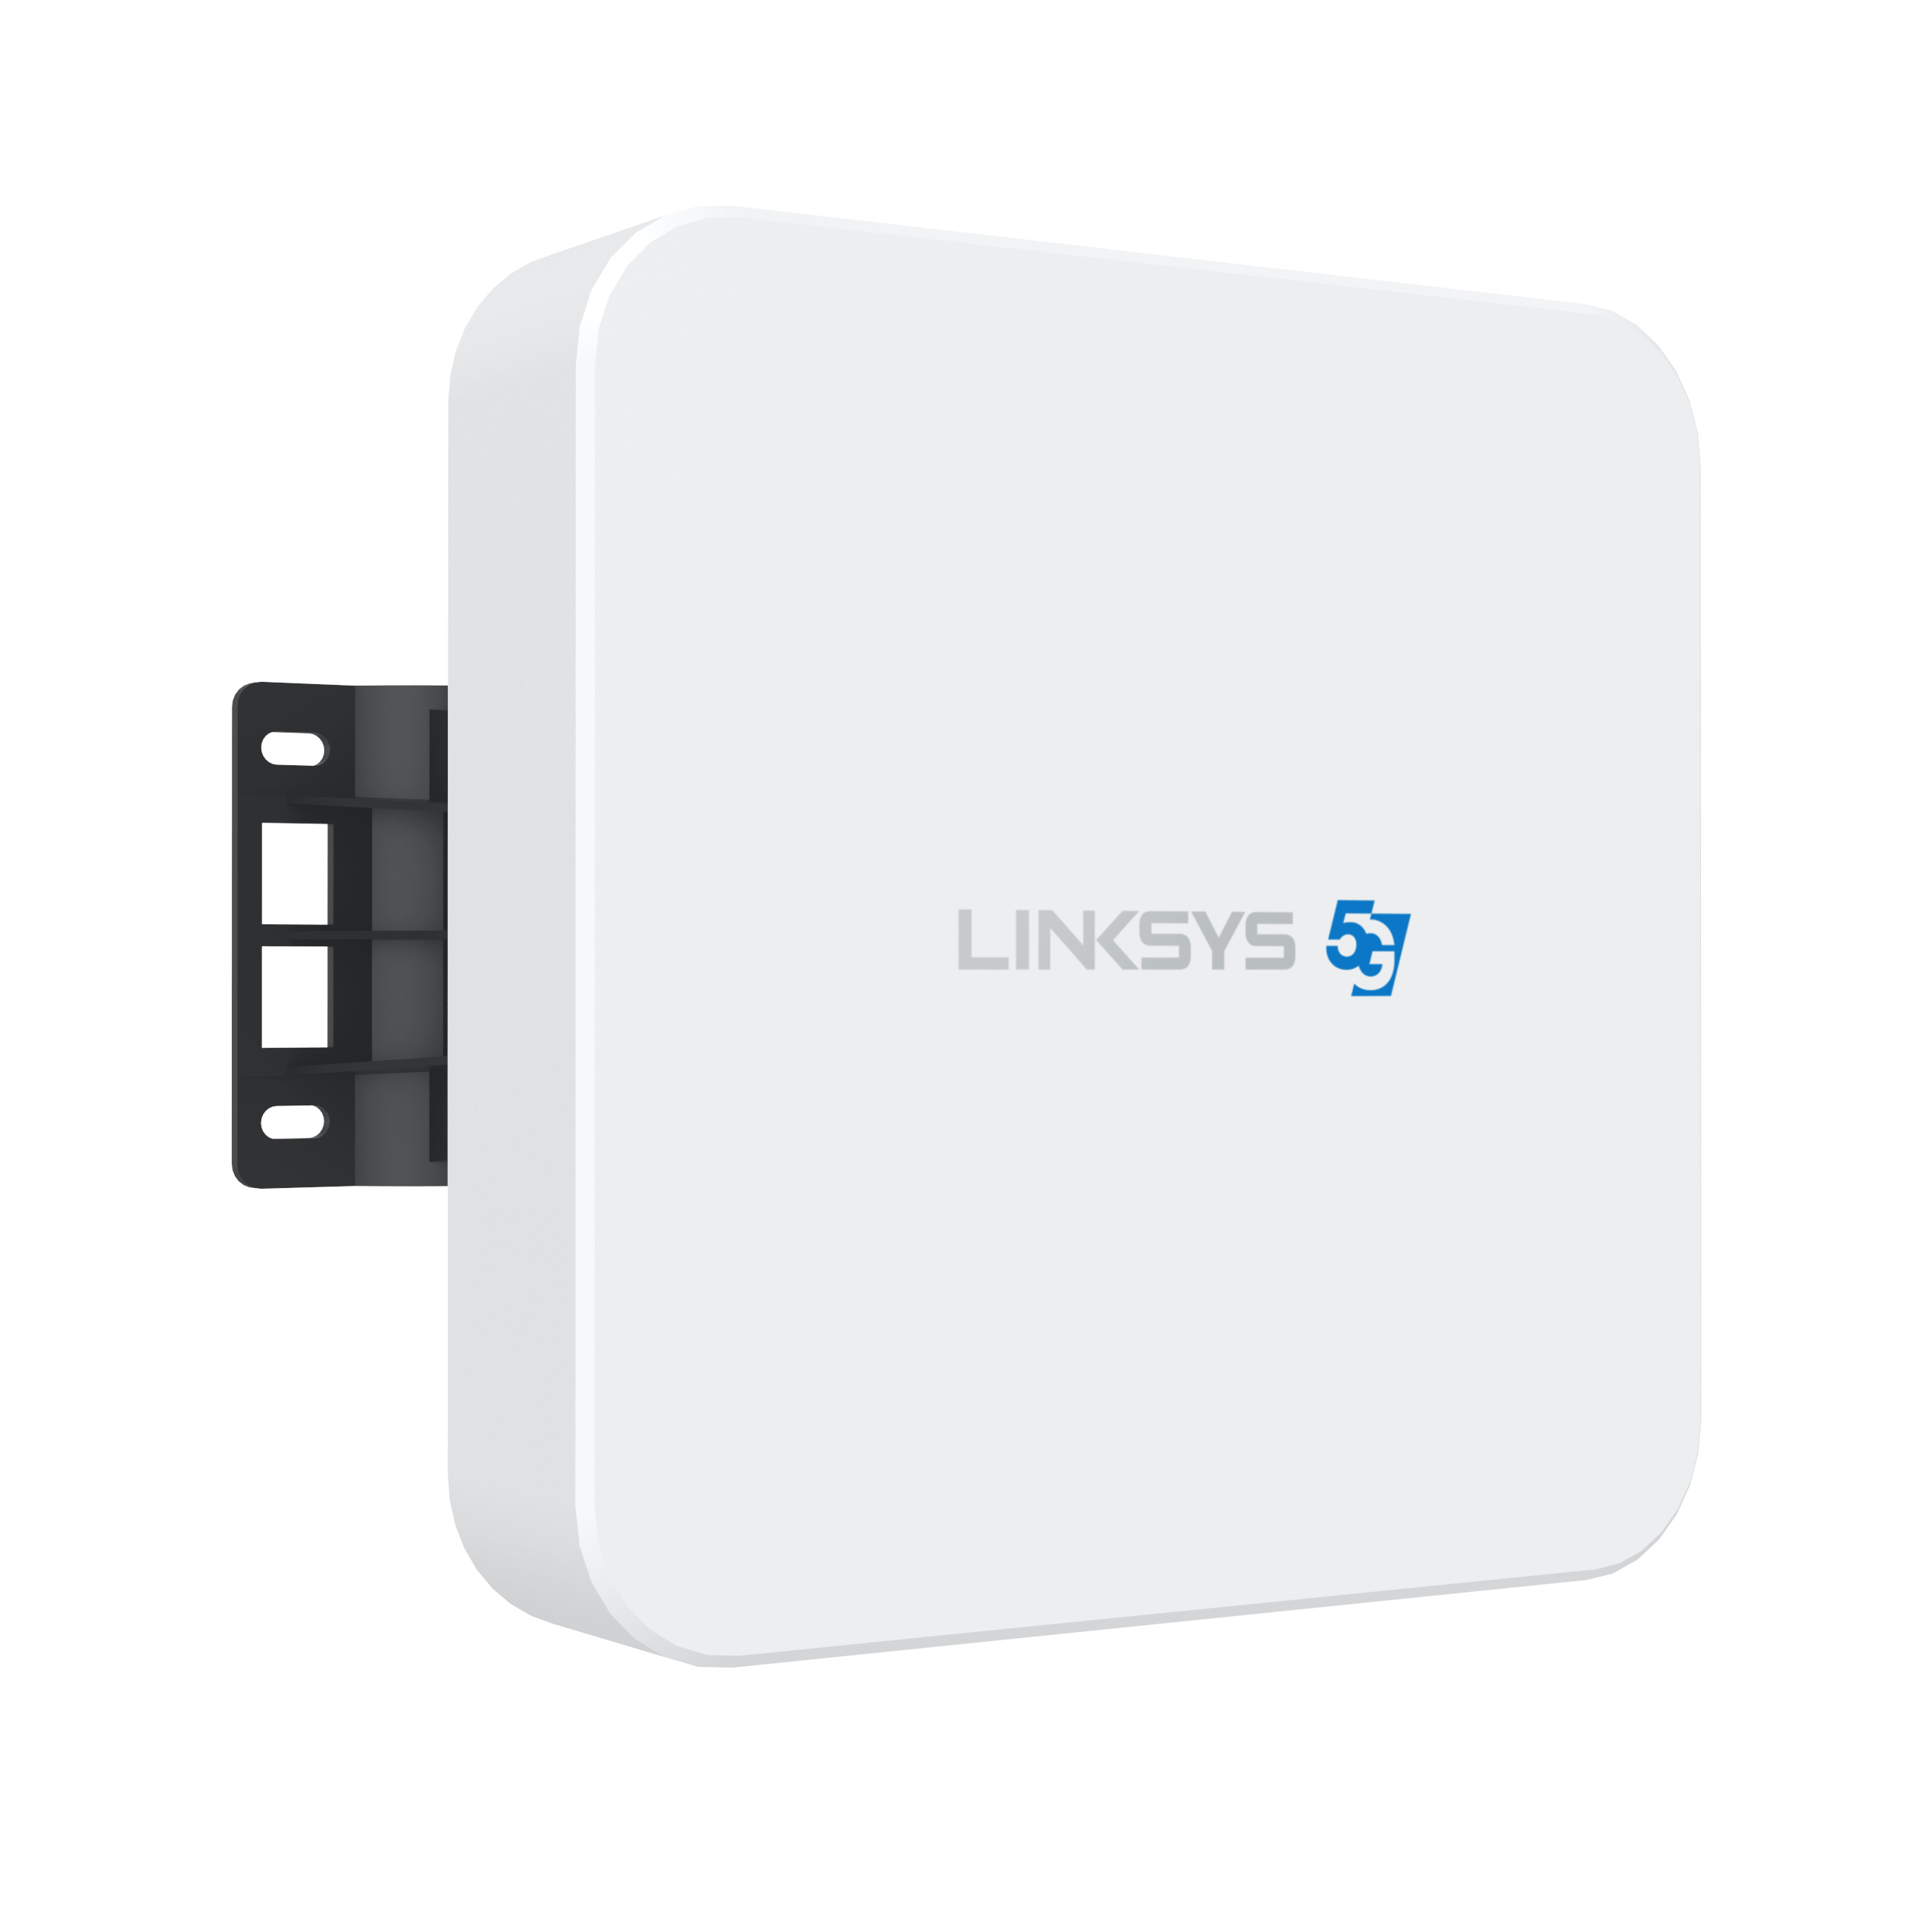 Linksys 5G Outdoor Router CES 2020: Linksys Unravel 5G & Wi Fi 6 Home Innovations